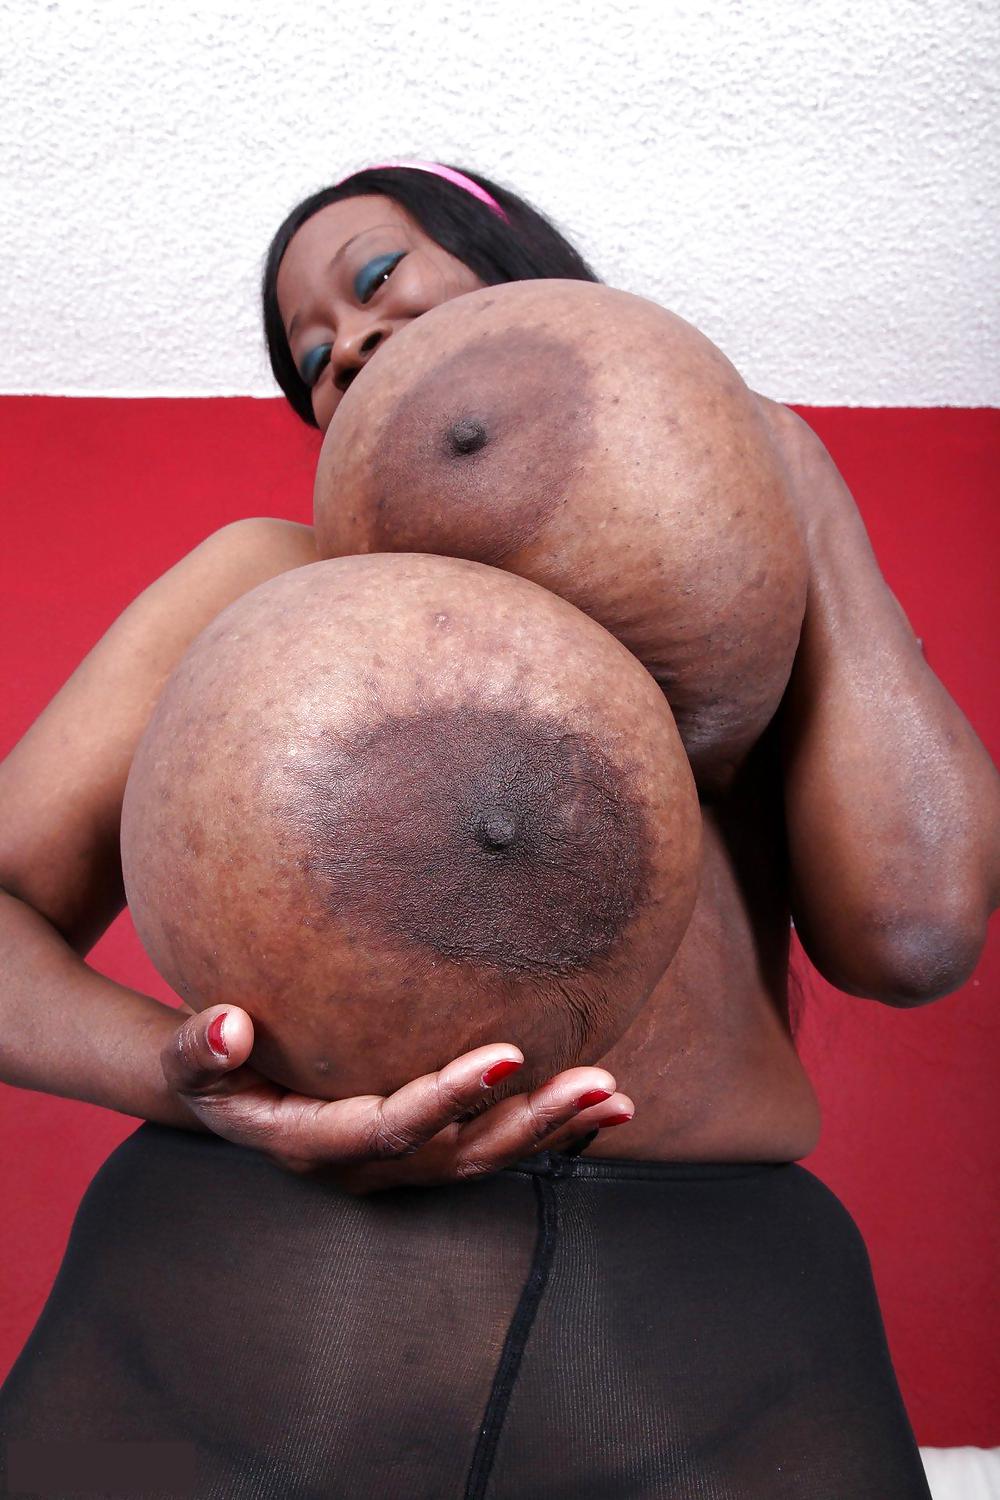 VOTE FOR YOR FAVOURITE BBW WITH HUGE BLACKS BOOBS  #25814859